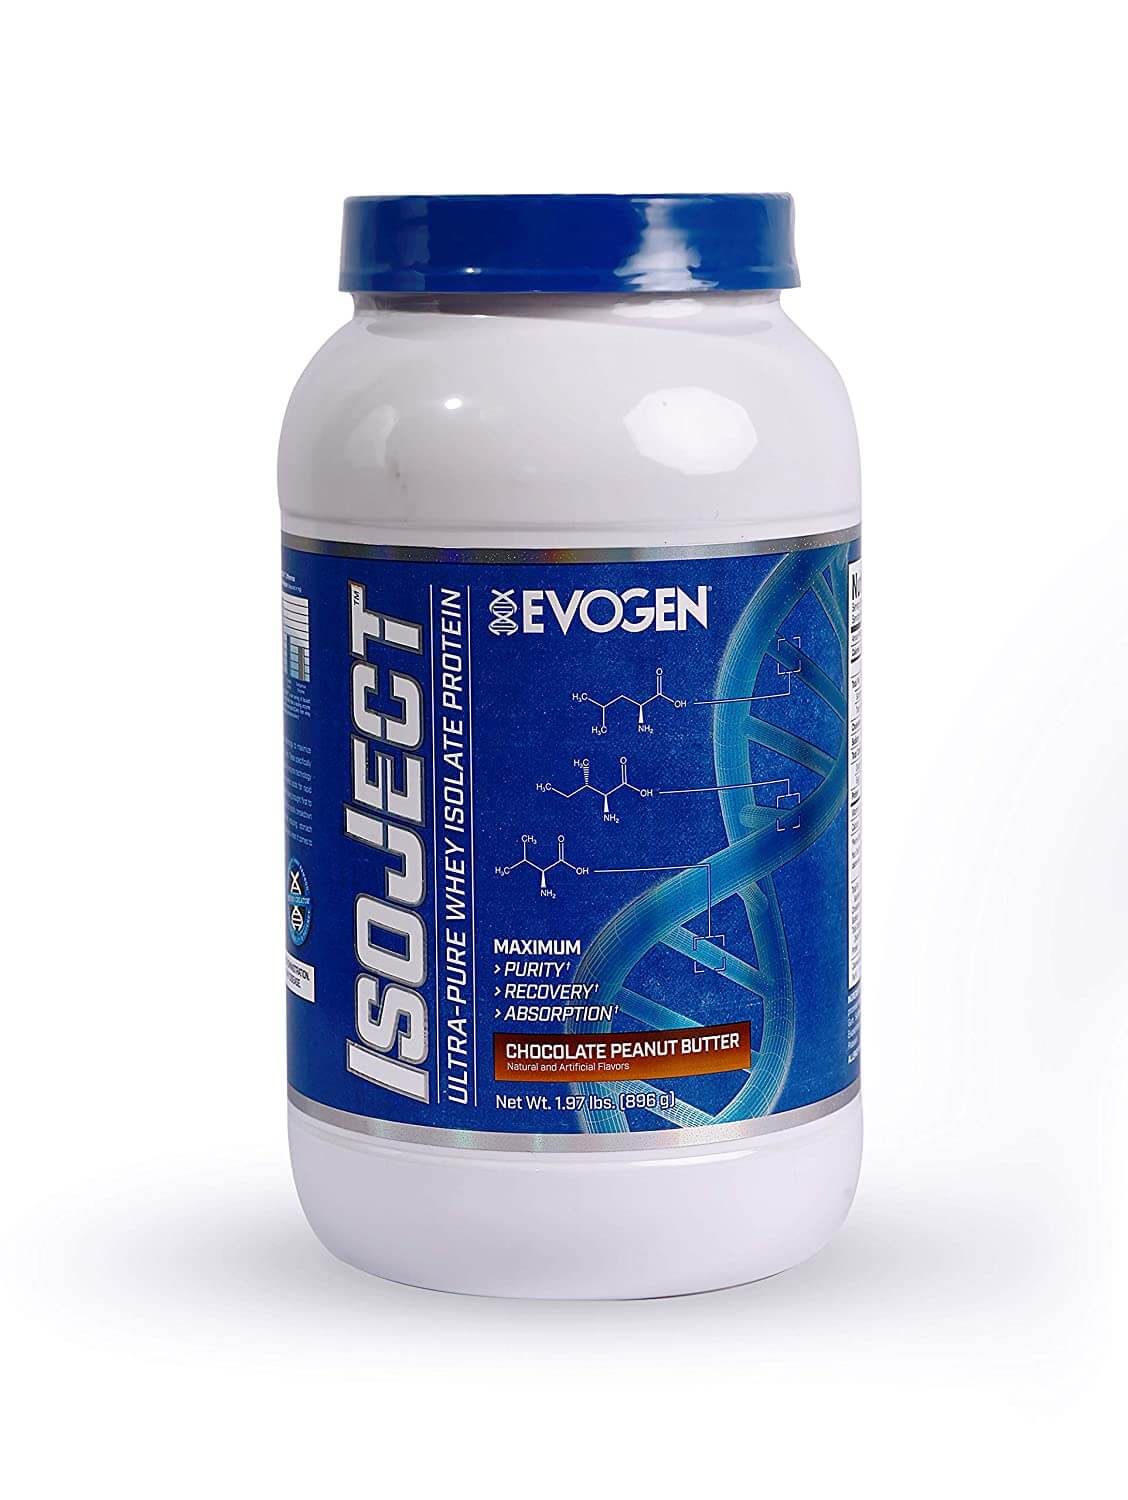  Evogen Isoject ULTRA-PURE WHEY ISOLATE PROTEIN. 100% whey isolate